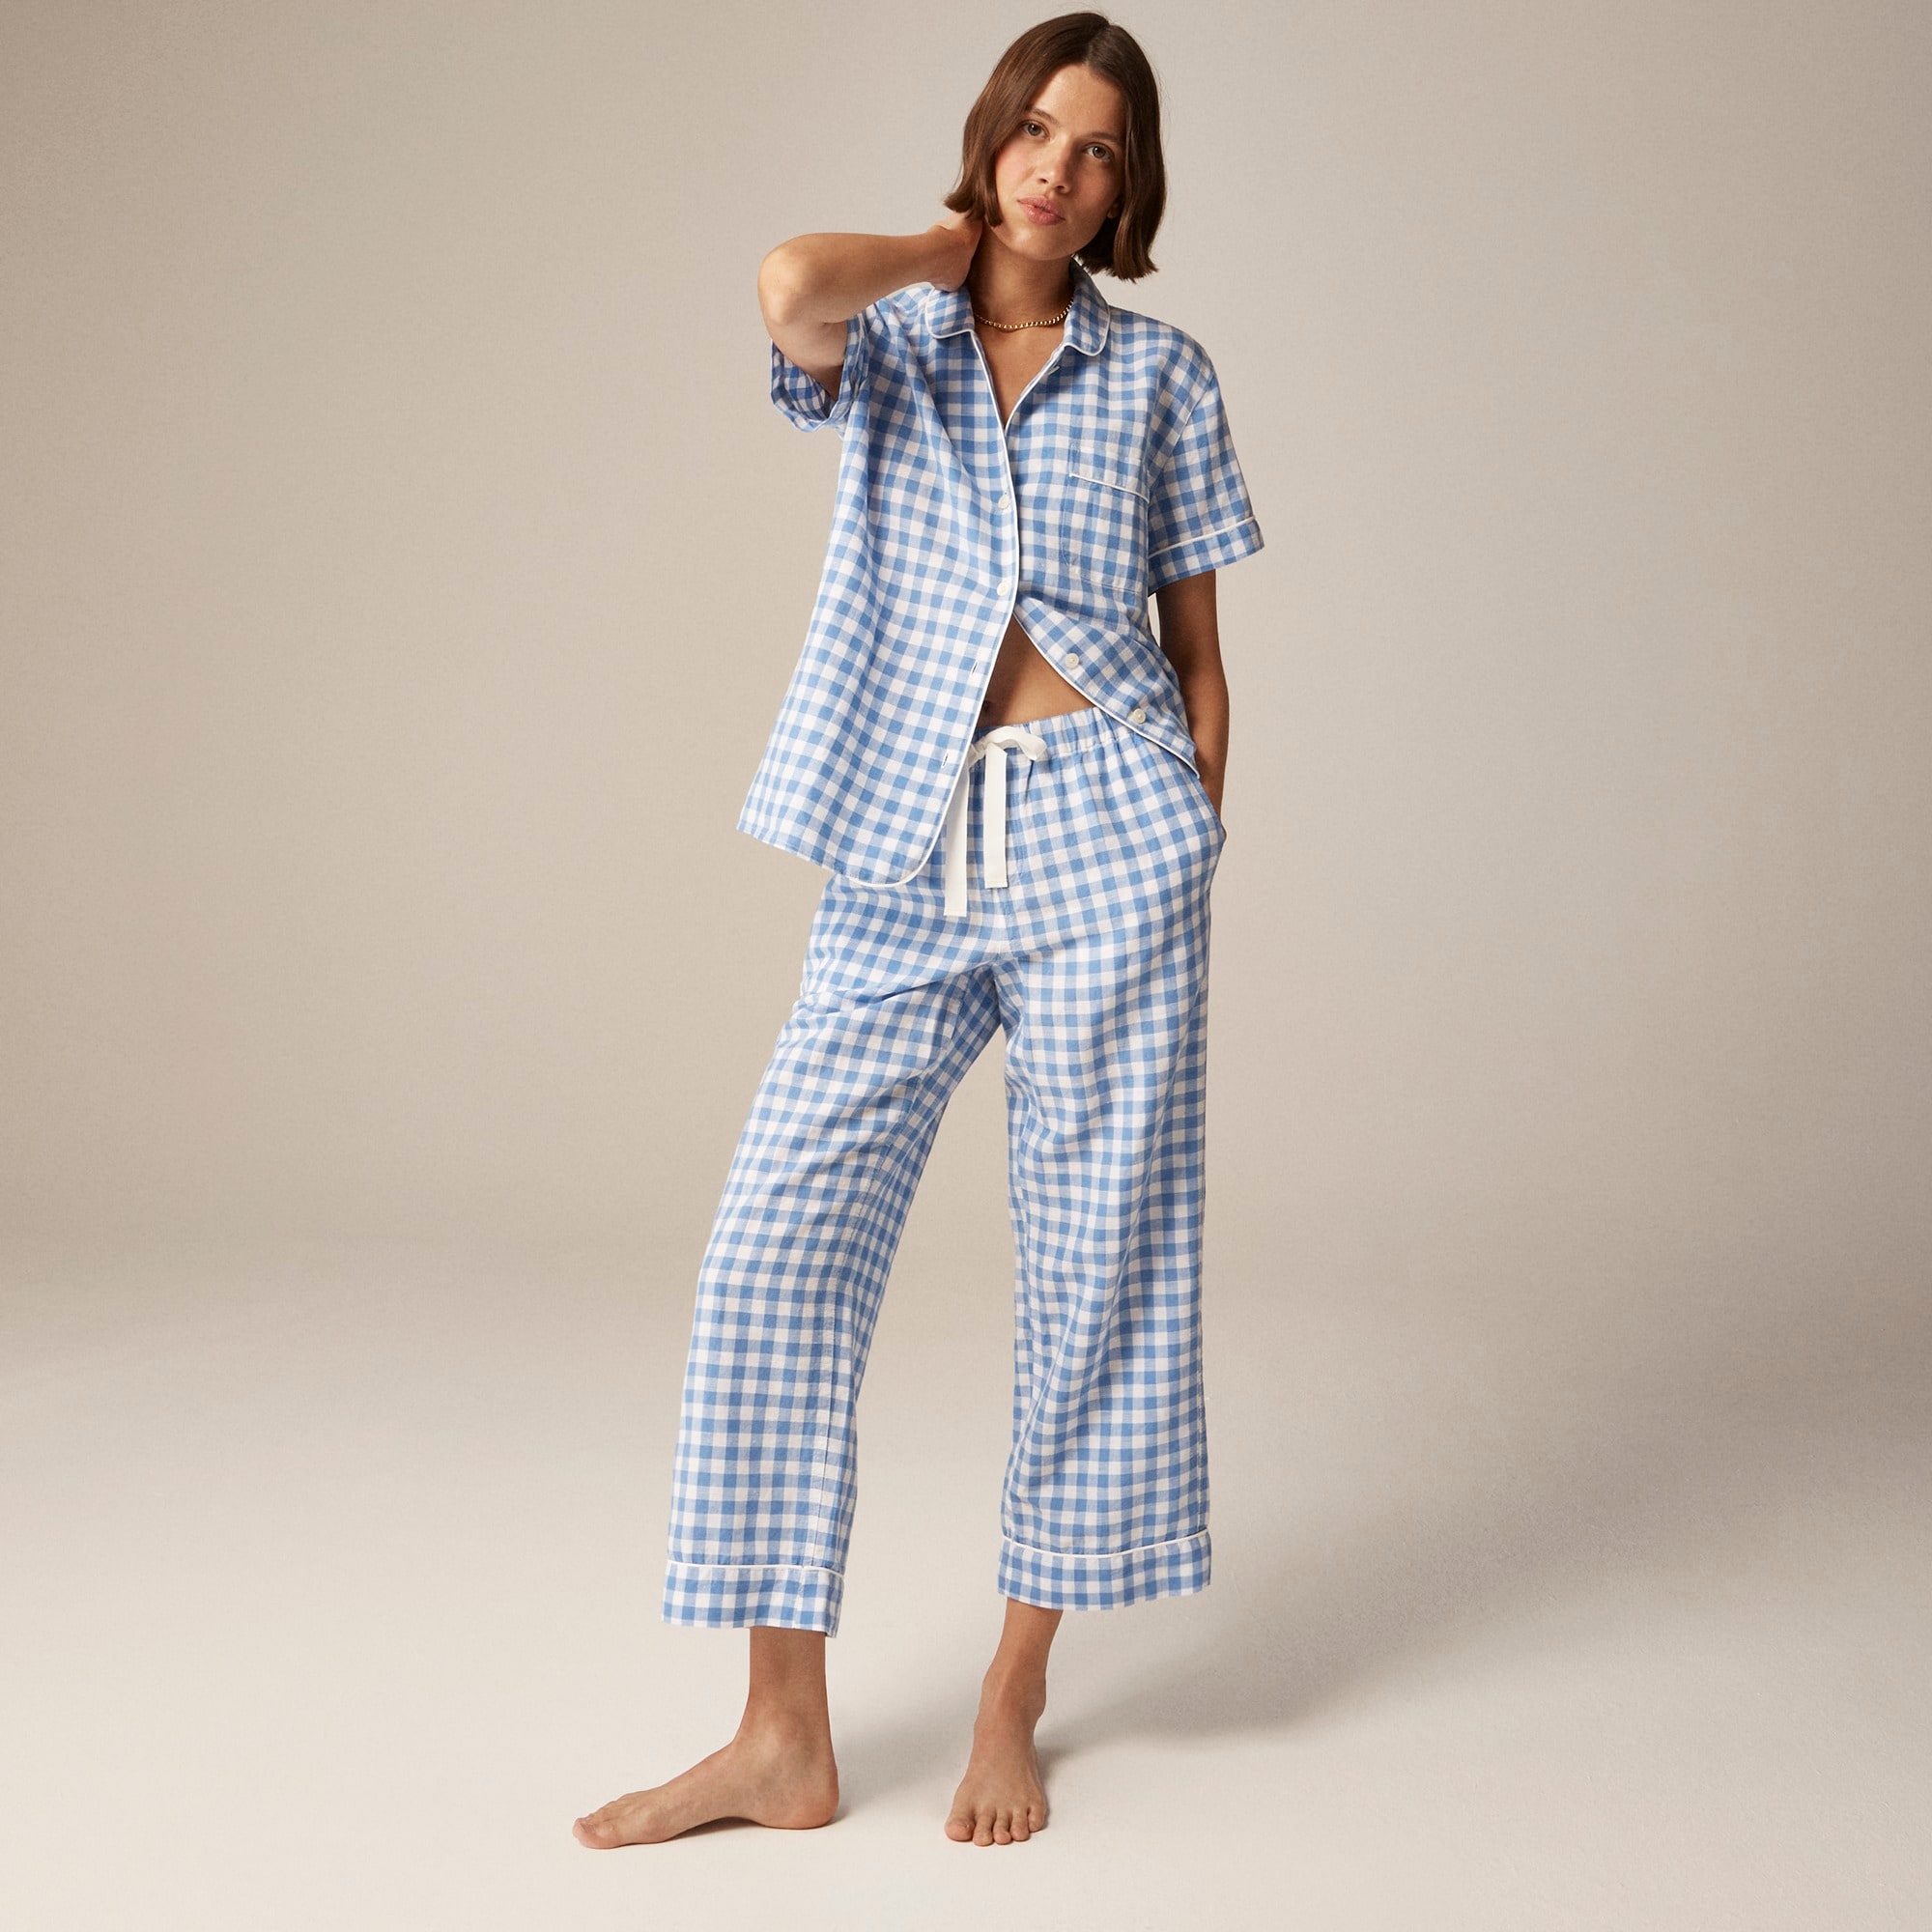 womens Pajama set in gingham linen-cotton blend